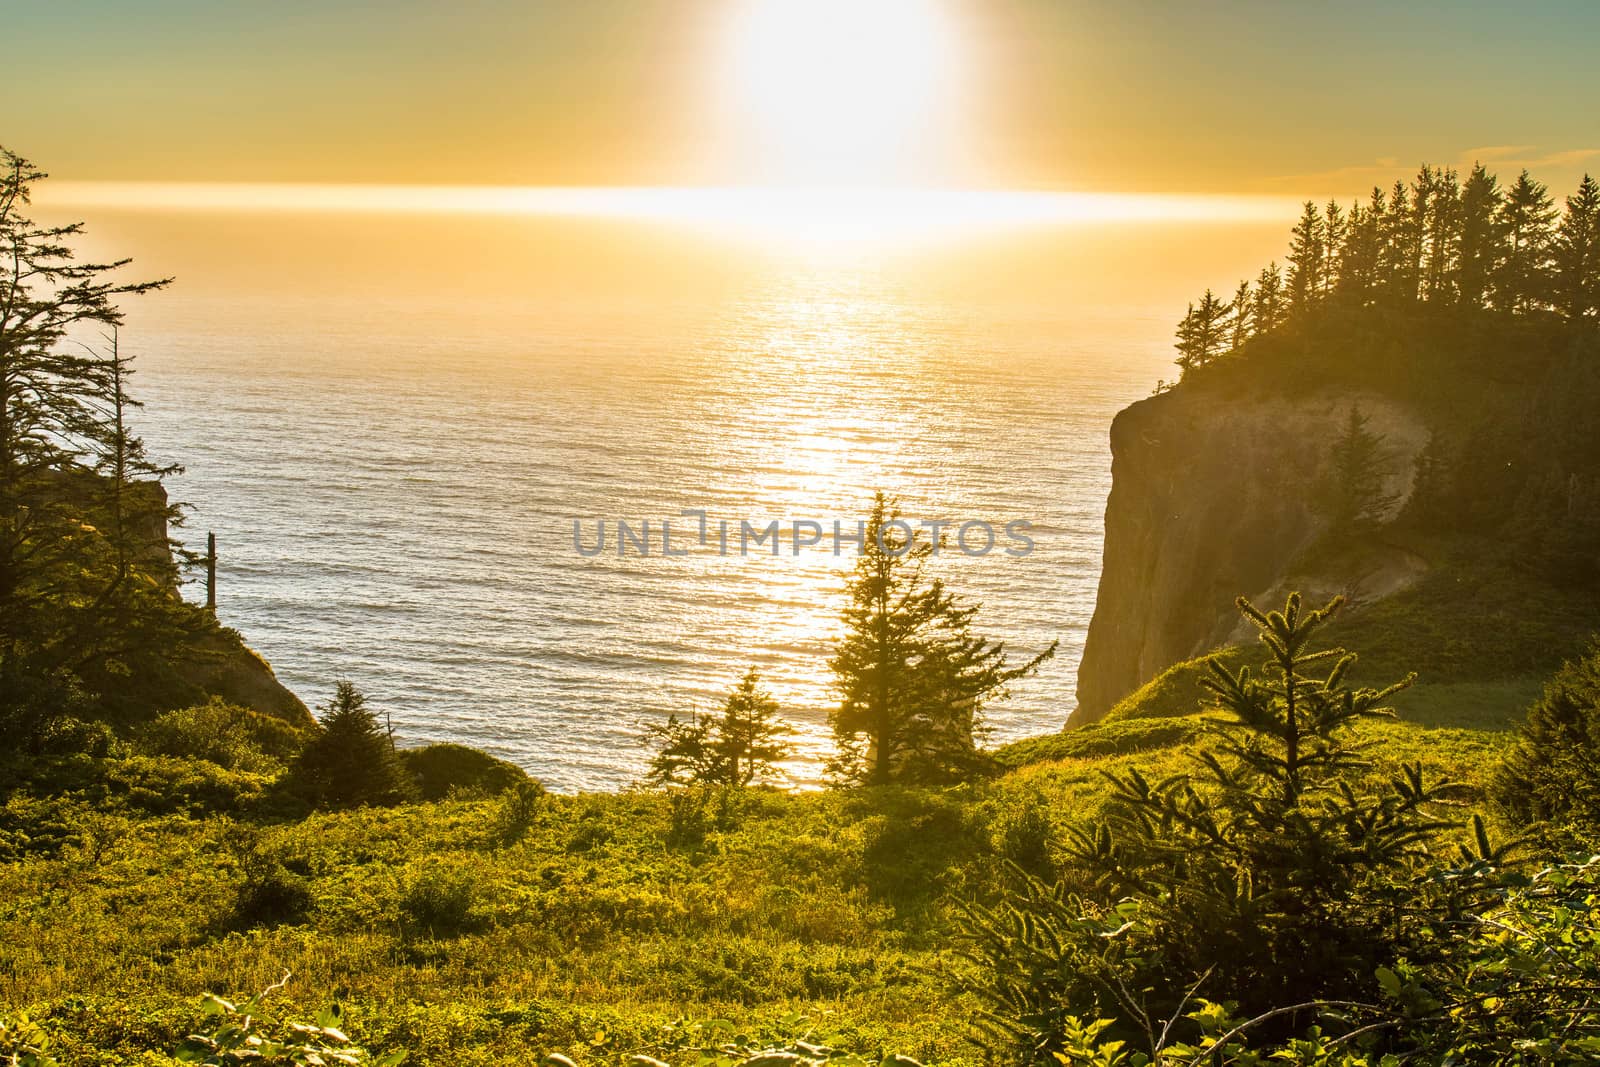 Taken from the roadside looking between two cliffs at the sun setting over the Pacific Ocean